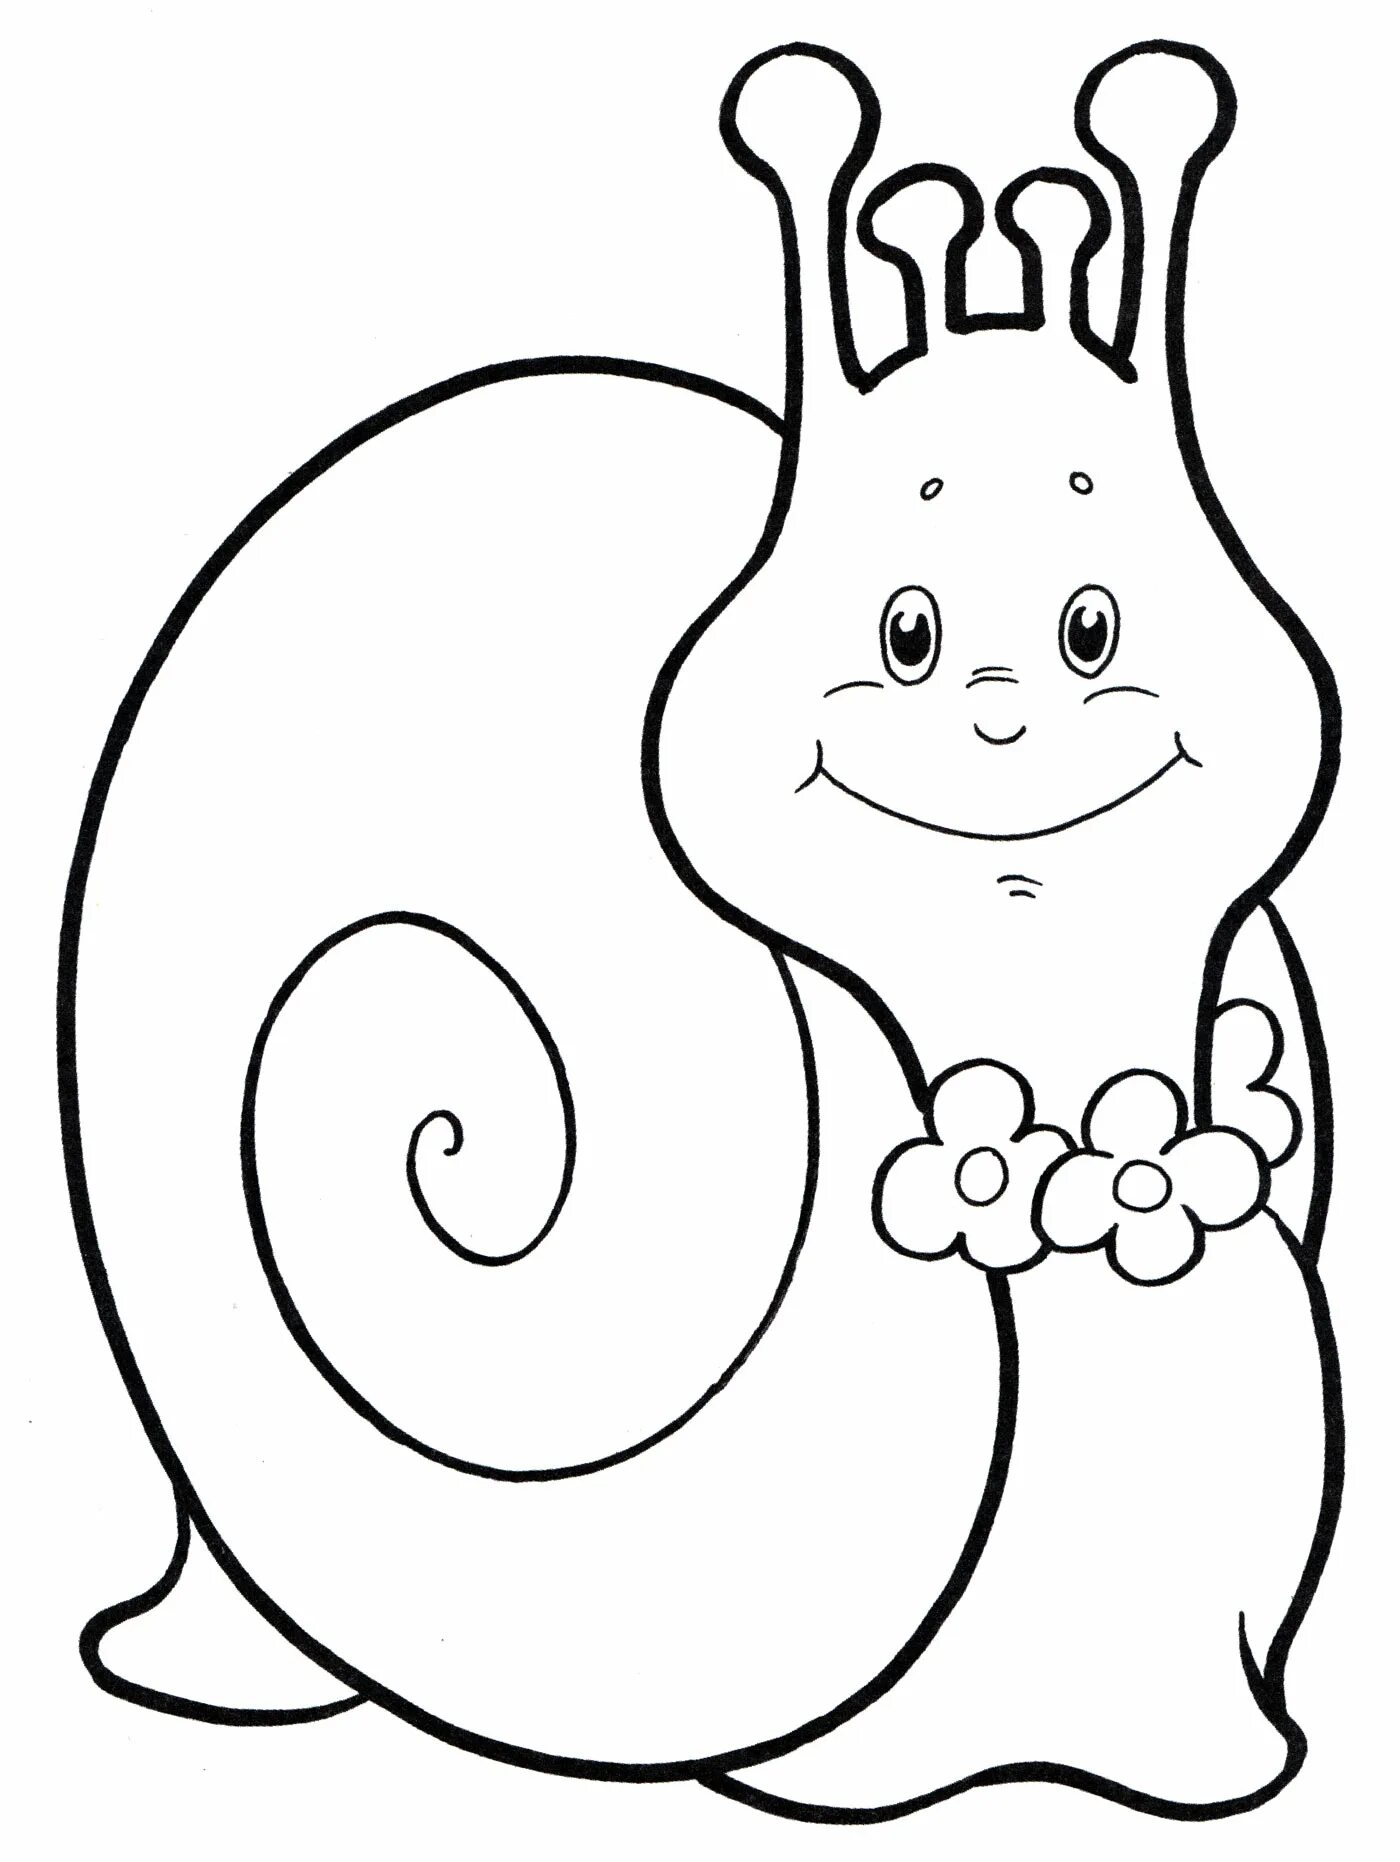 Playful coloring book snail for 3-4 year olds